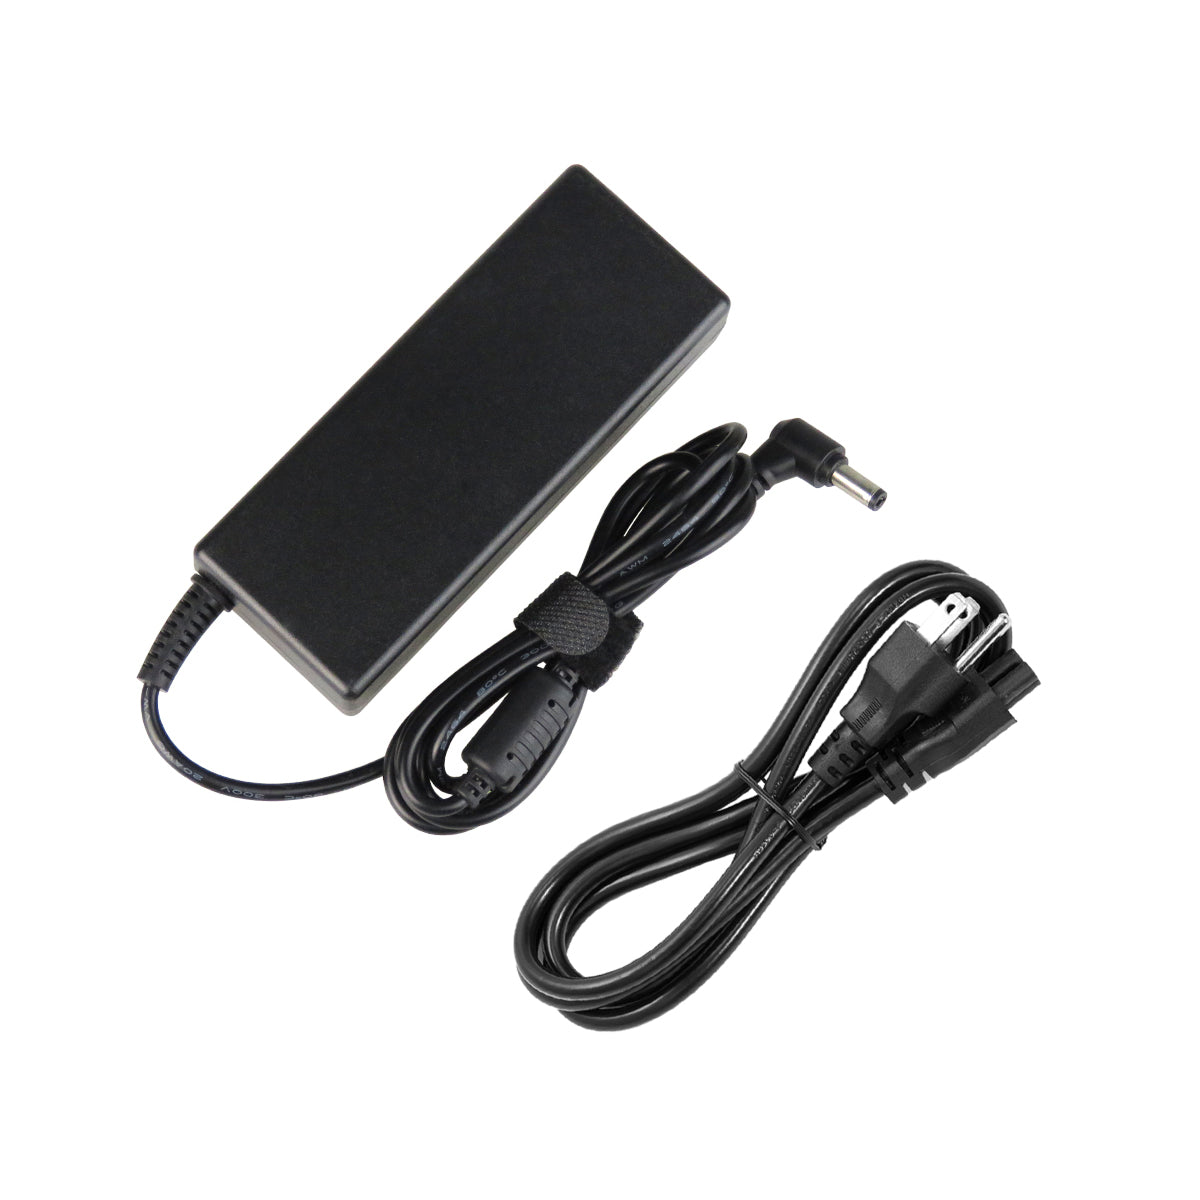 AC Adapter Charger for ASUS K53TA Notebook.